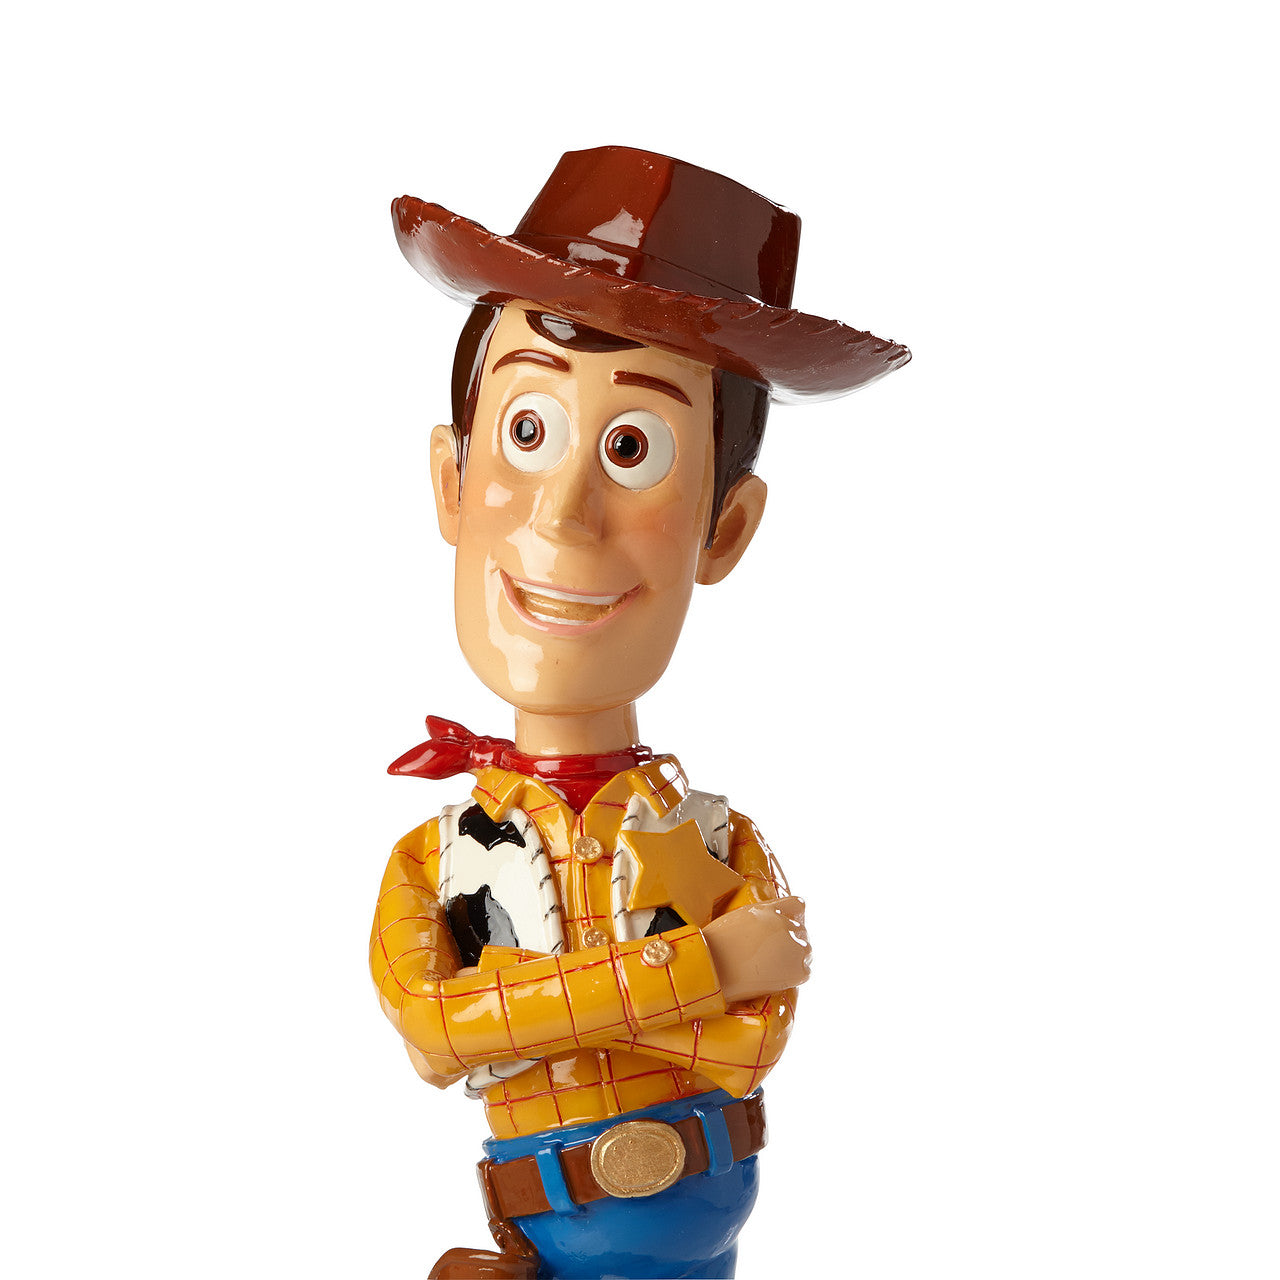 Disney Toy Story Woody Figurine  Howdy Partner! There's a new Sheriff in town and he found his way into the Disney Showcase Collection in this faithful recreation of the unforgettable stars of Disney/Pixar's Toy Story feature animation films.